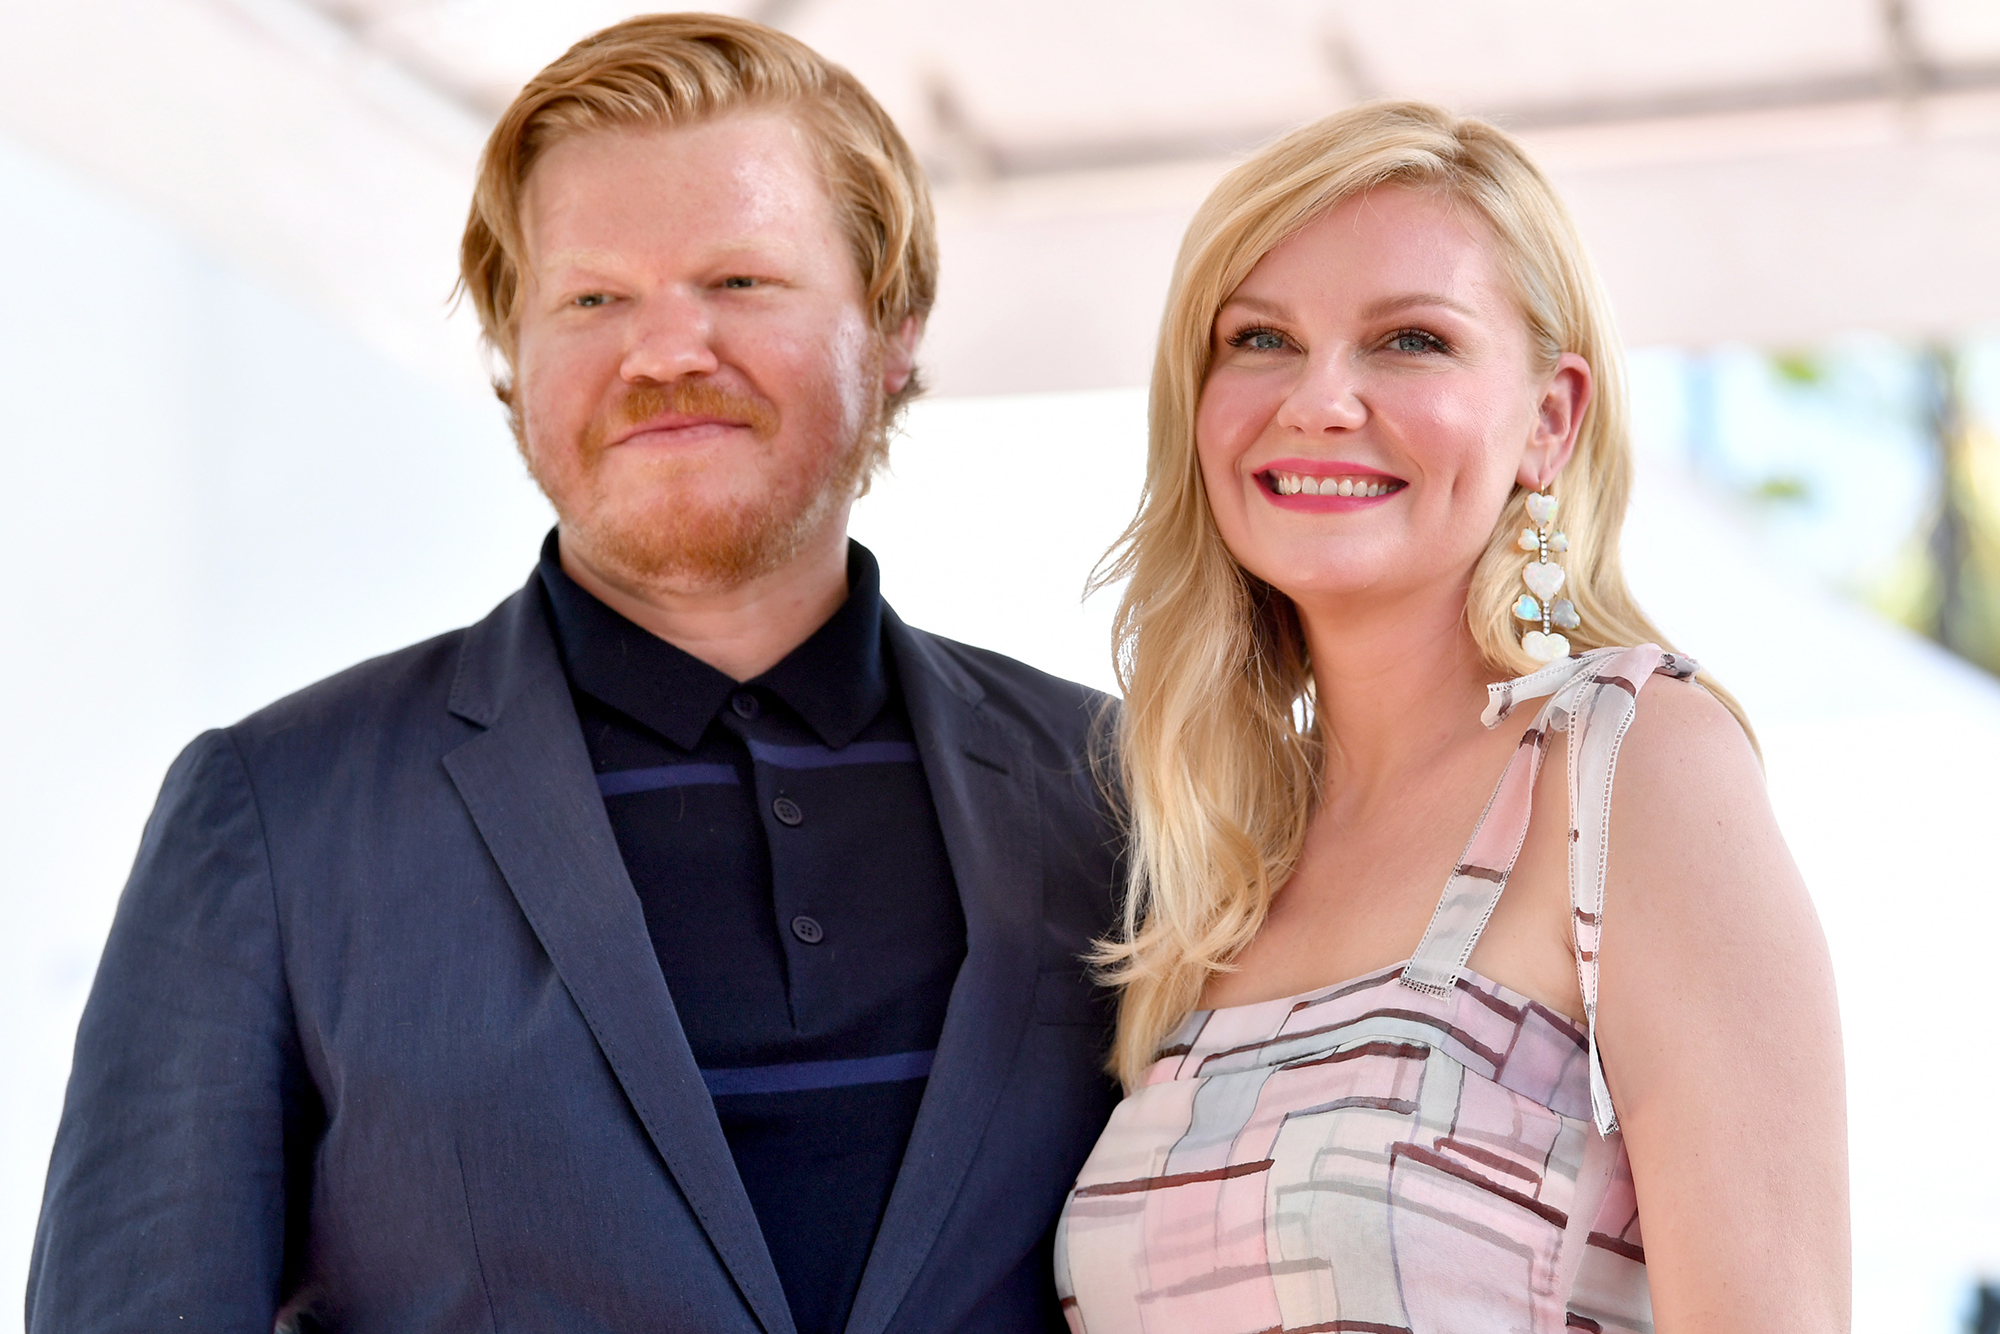 Jesse Plemons and Kirsten Dunst are expecting their second child together.